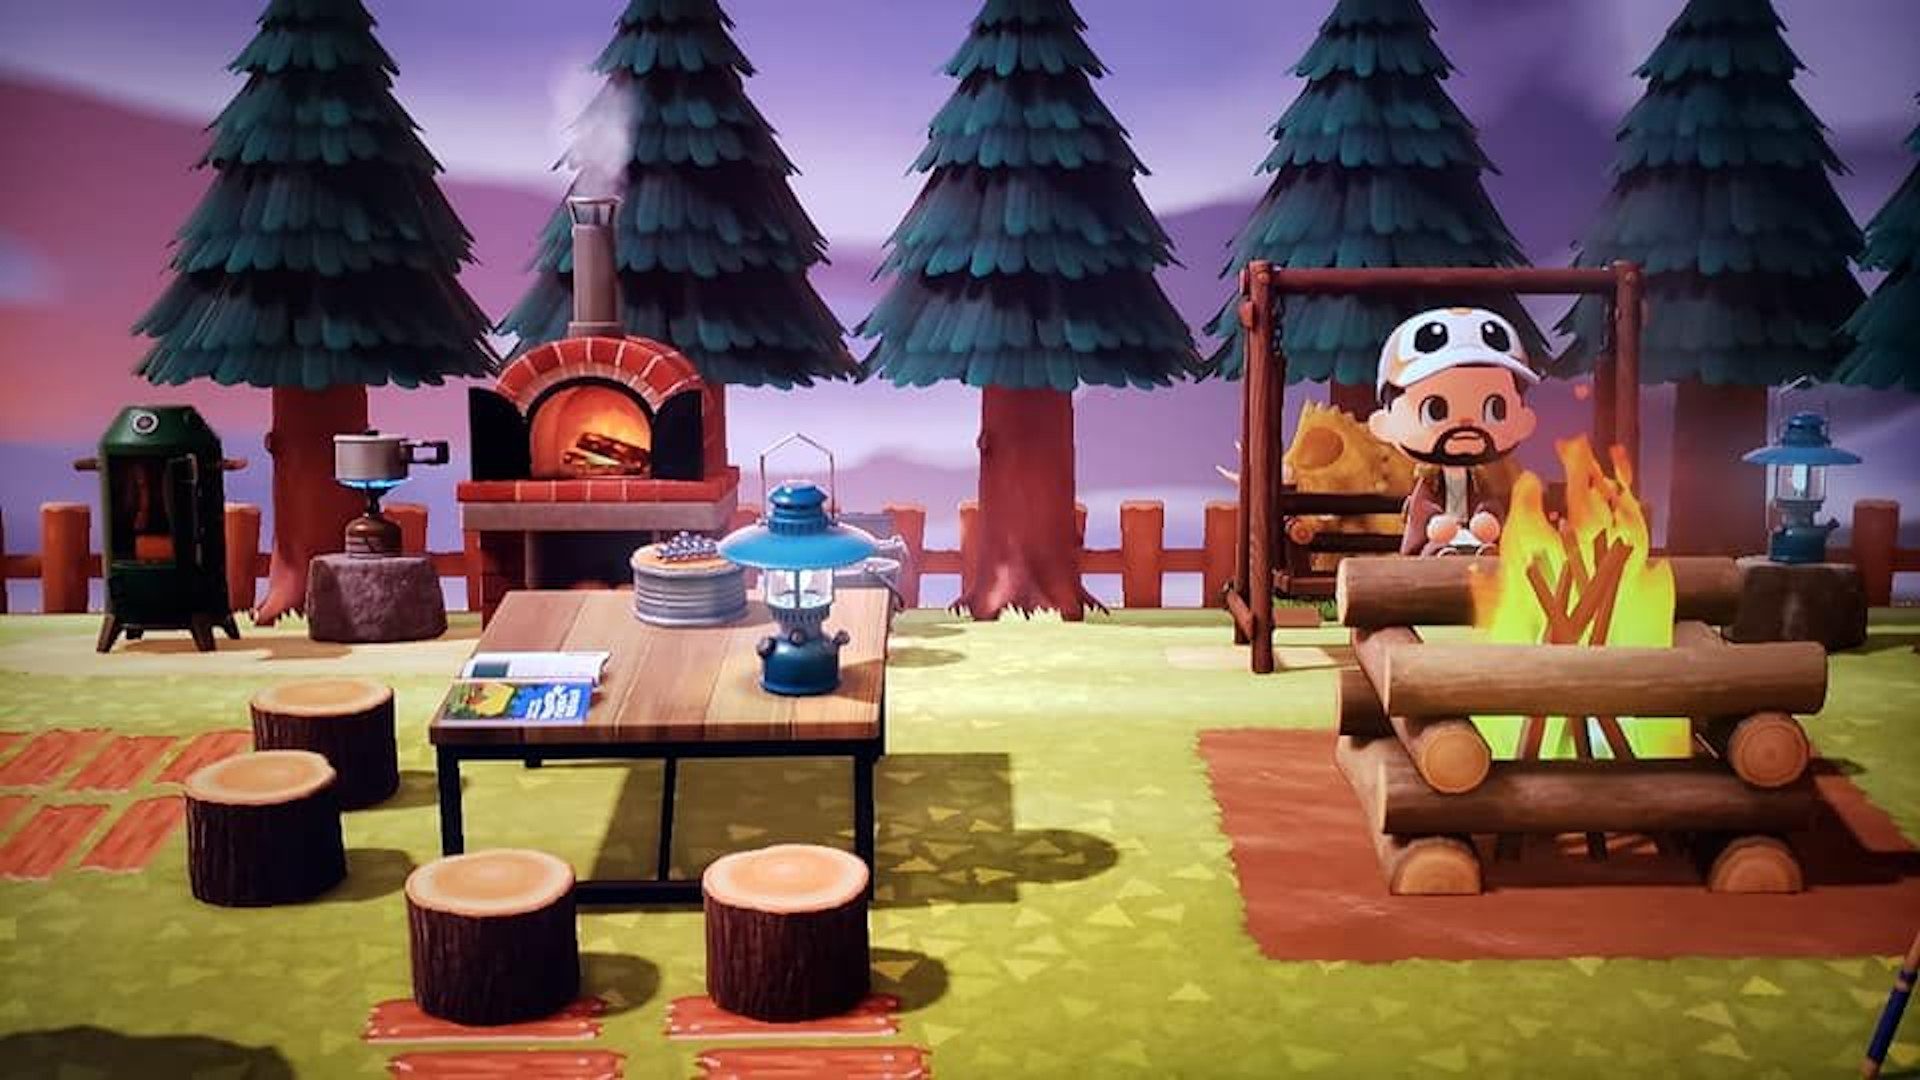 Animal Crossing New Horizons island ideas: An AnimalCrossing character sat at a picnic table in a campsite setting.